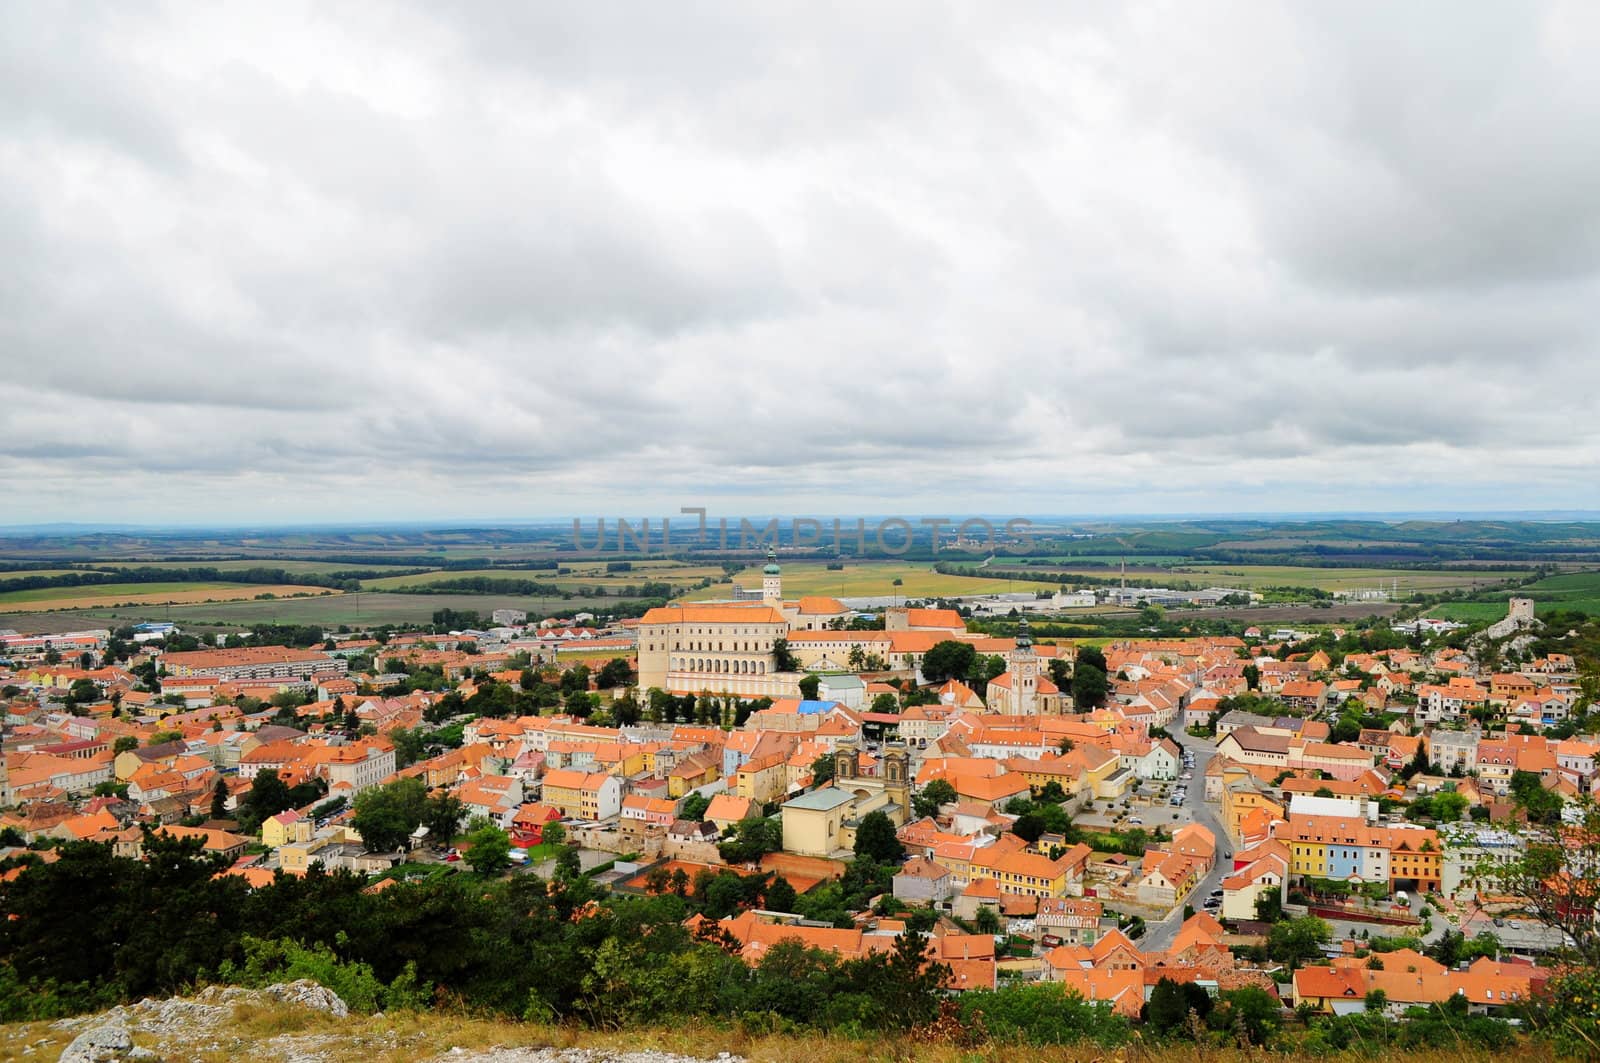 Czech Moravian landscape with the view on the town of Mikulov and his Castle